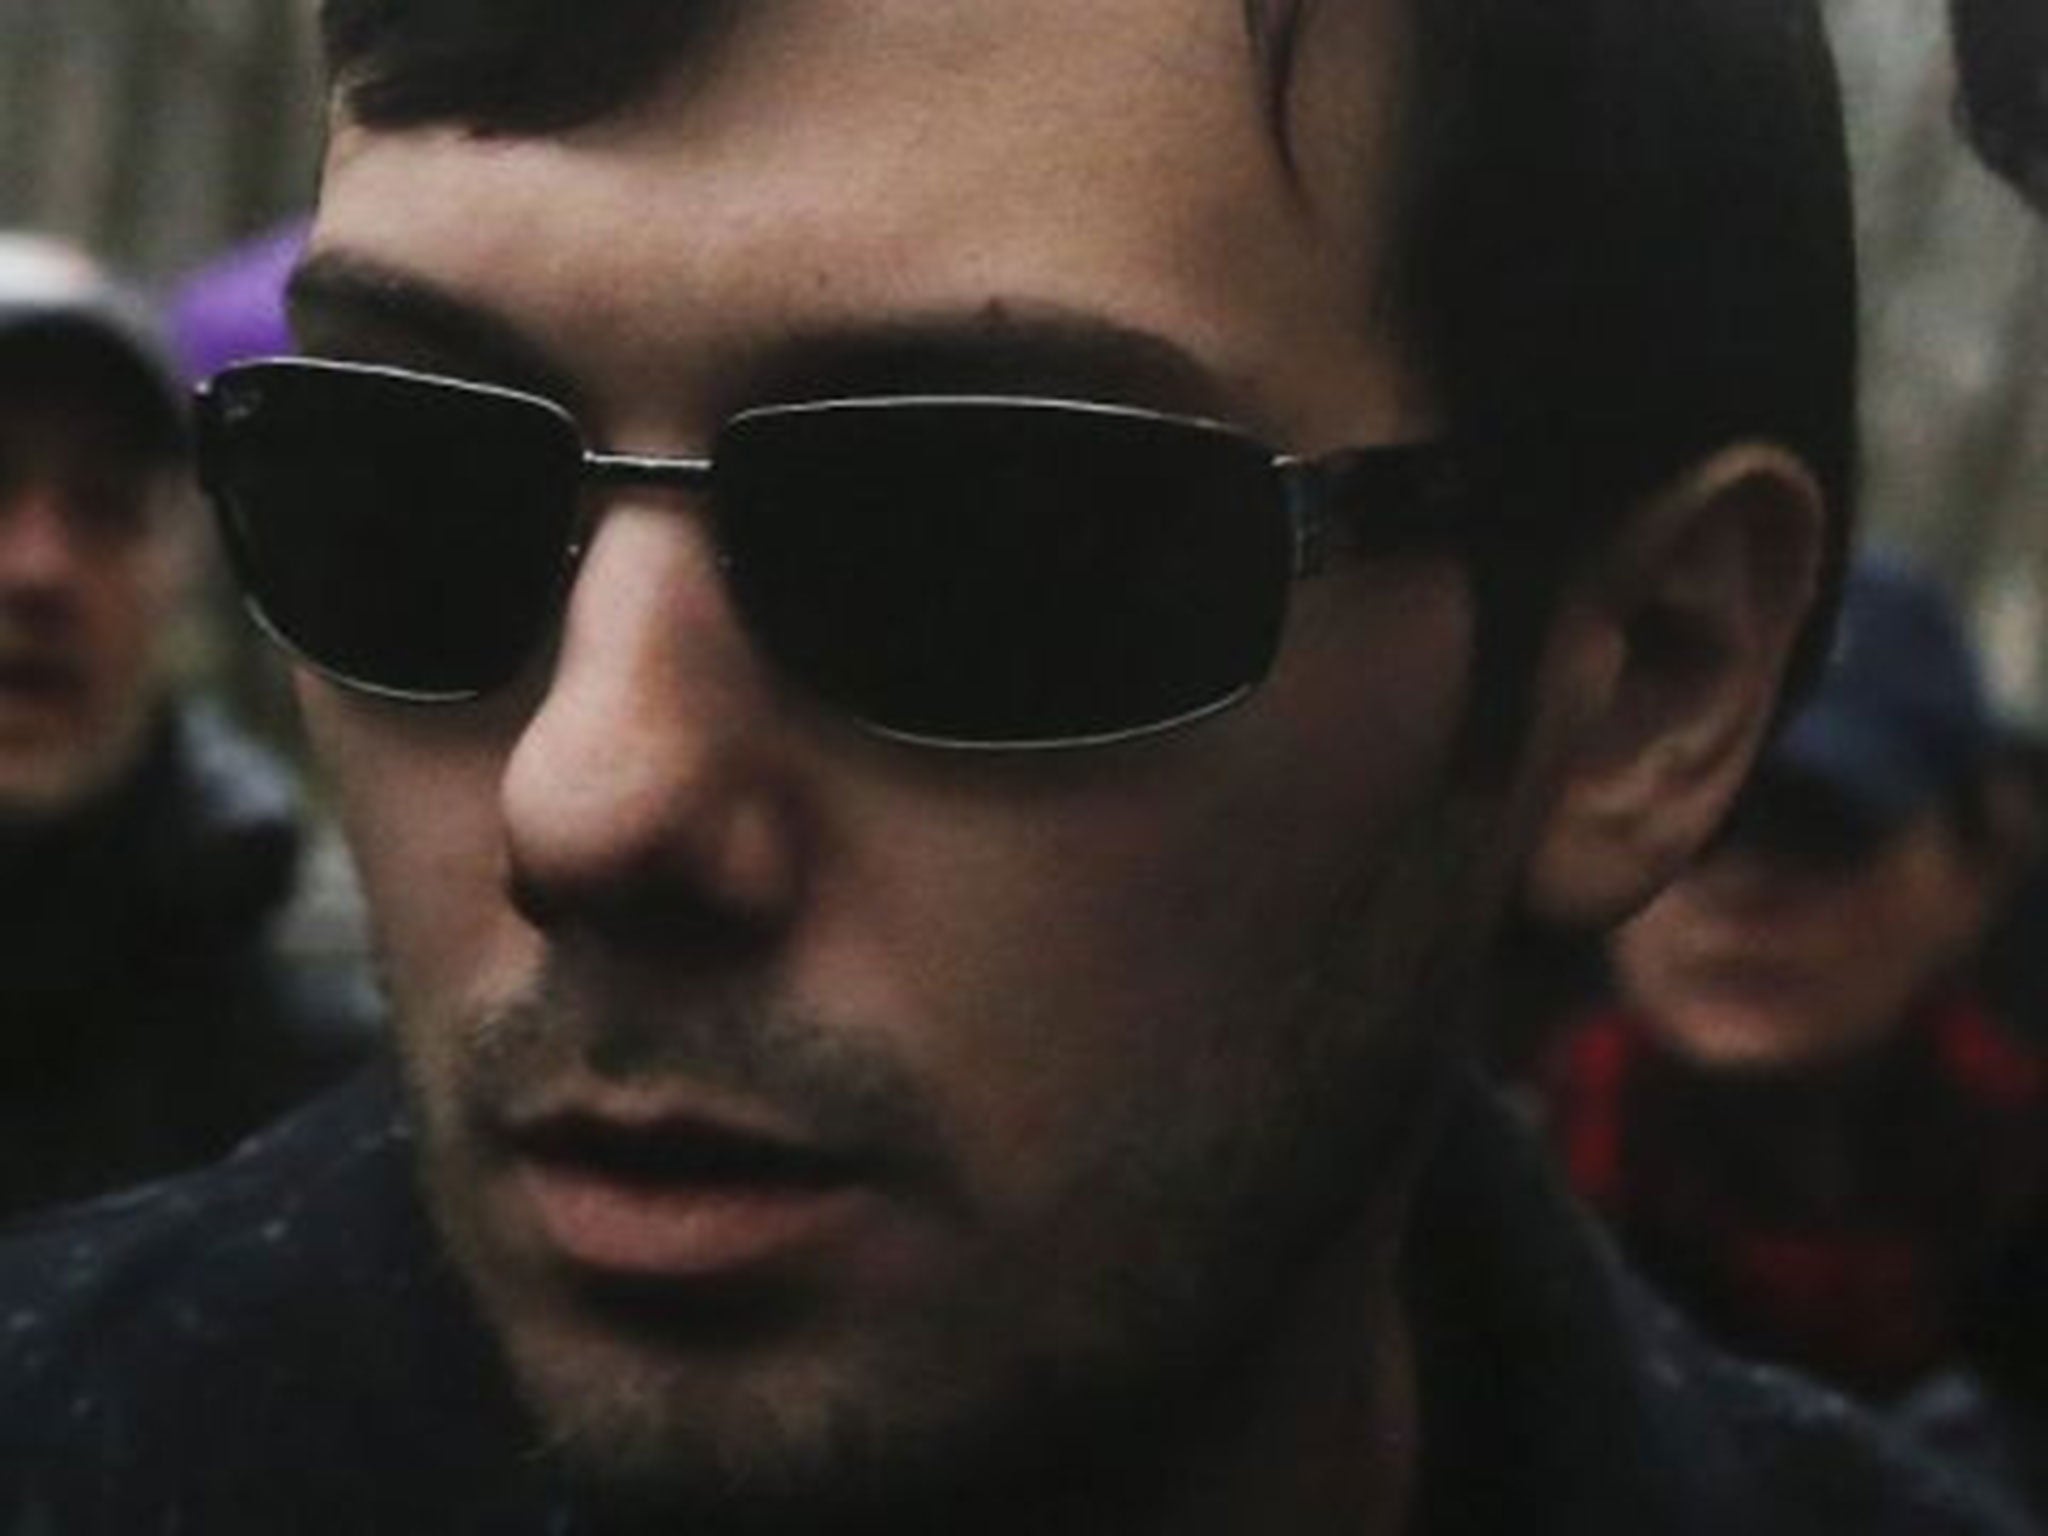 Martin Shkreli was arrested for securities fraud